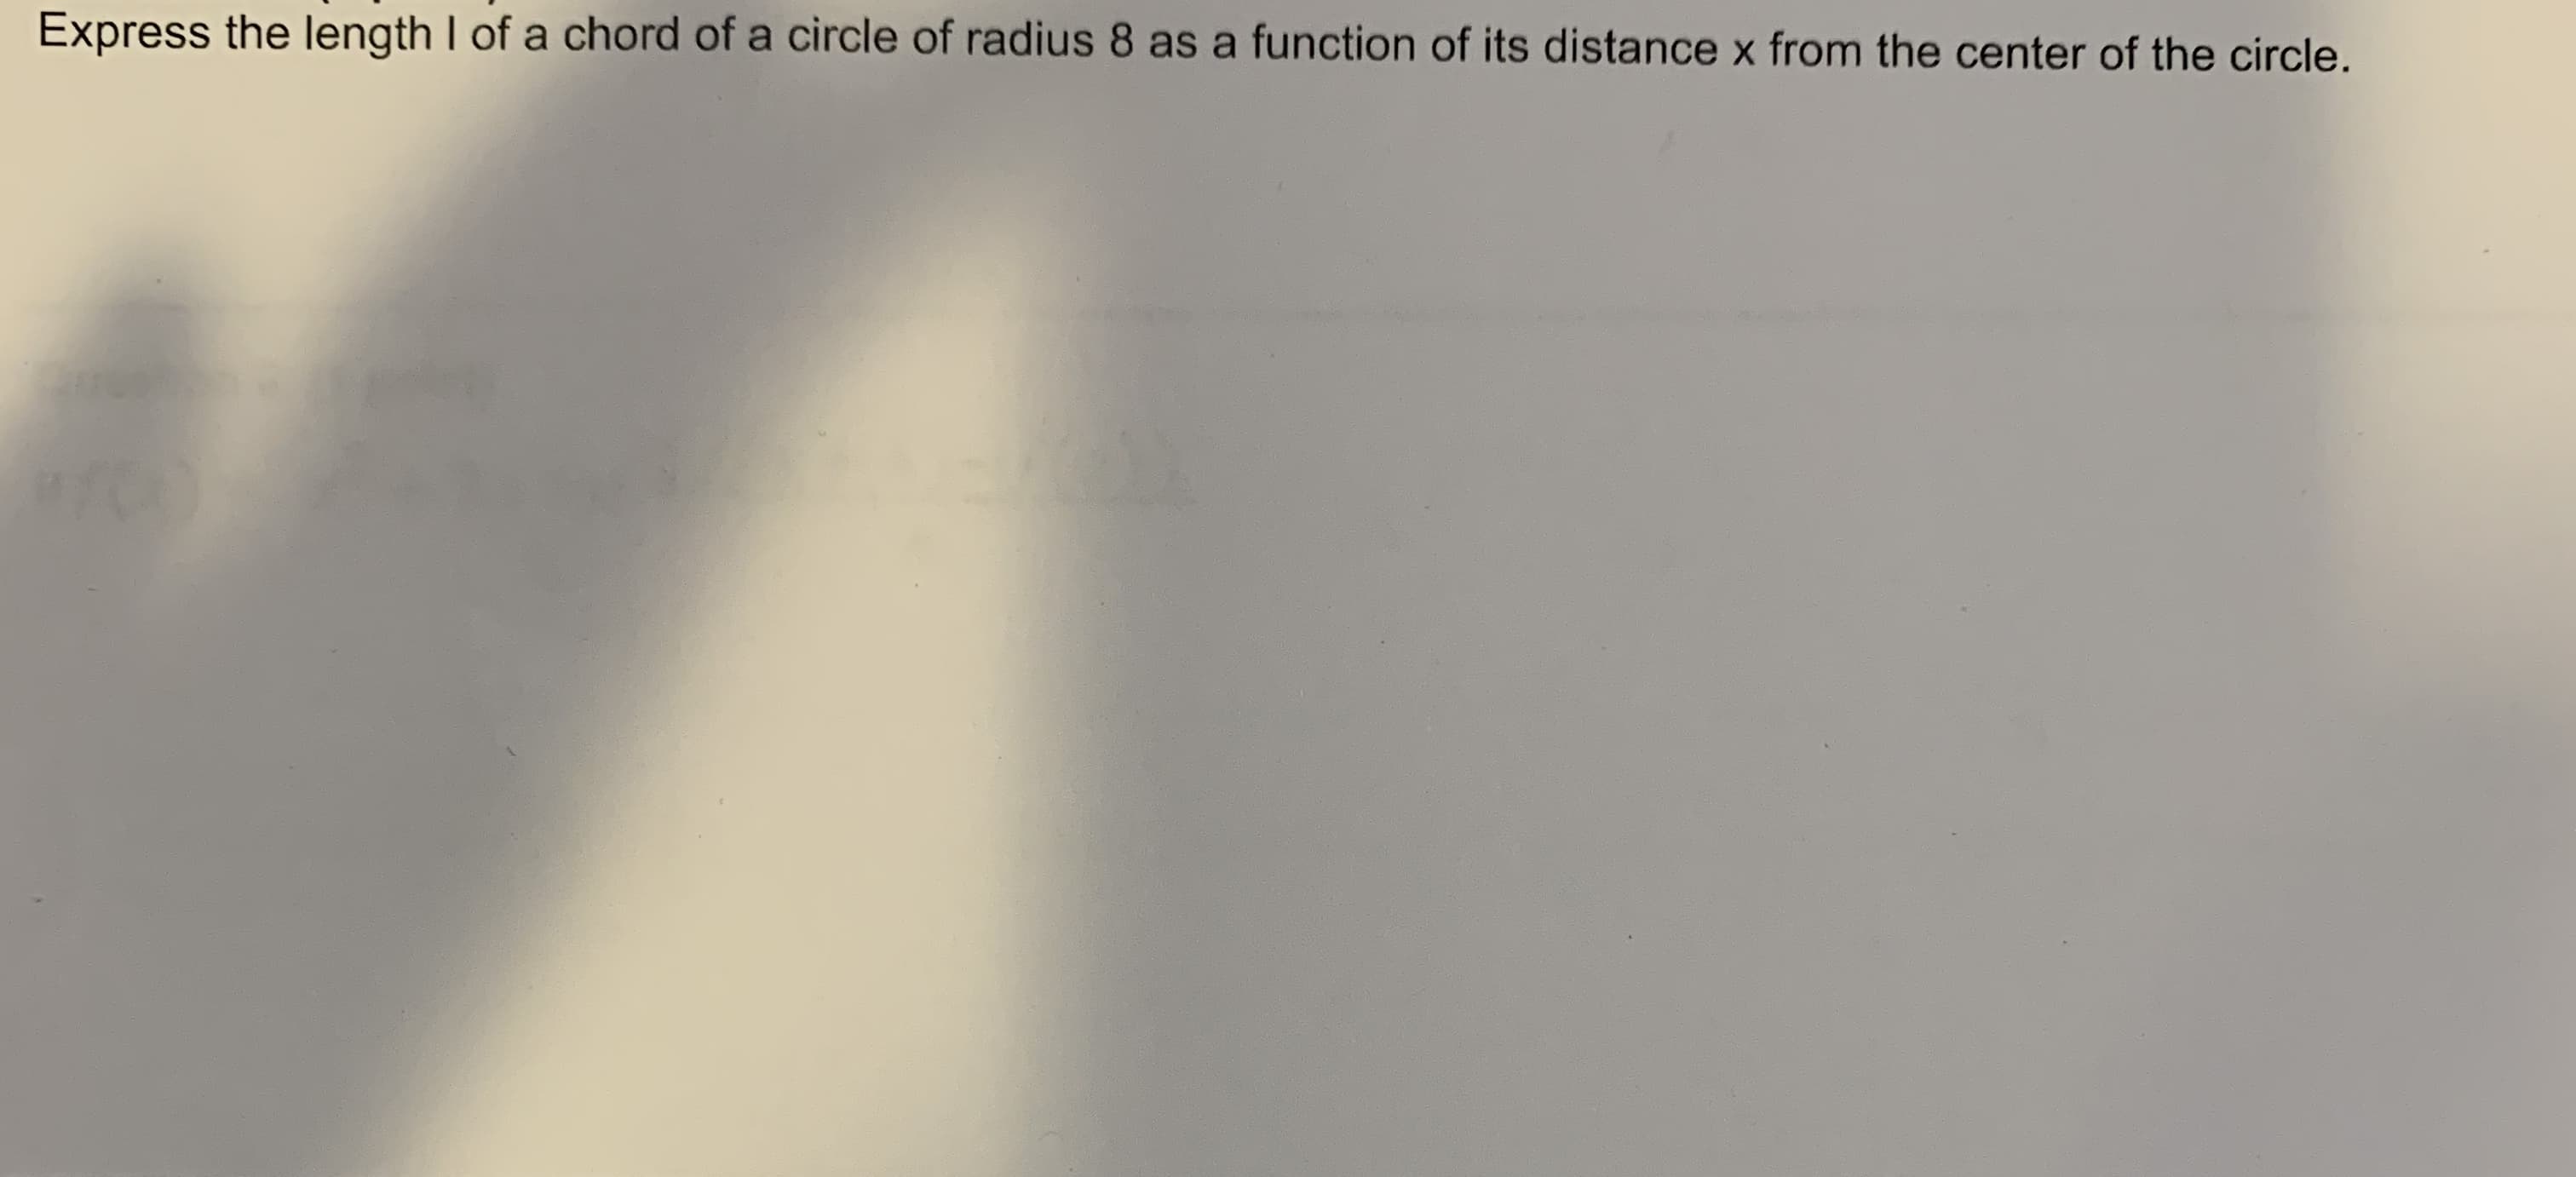 Express the length I of a chord of a circle of radius 8 as a function of its distance x from the center of the circle.
